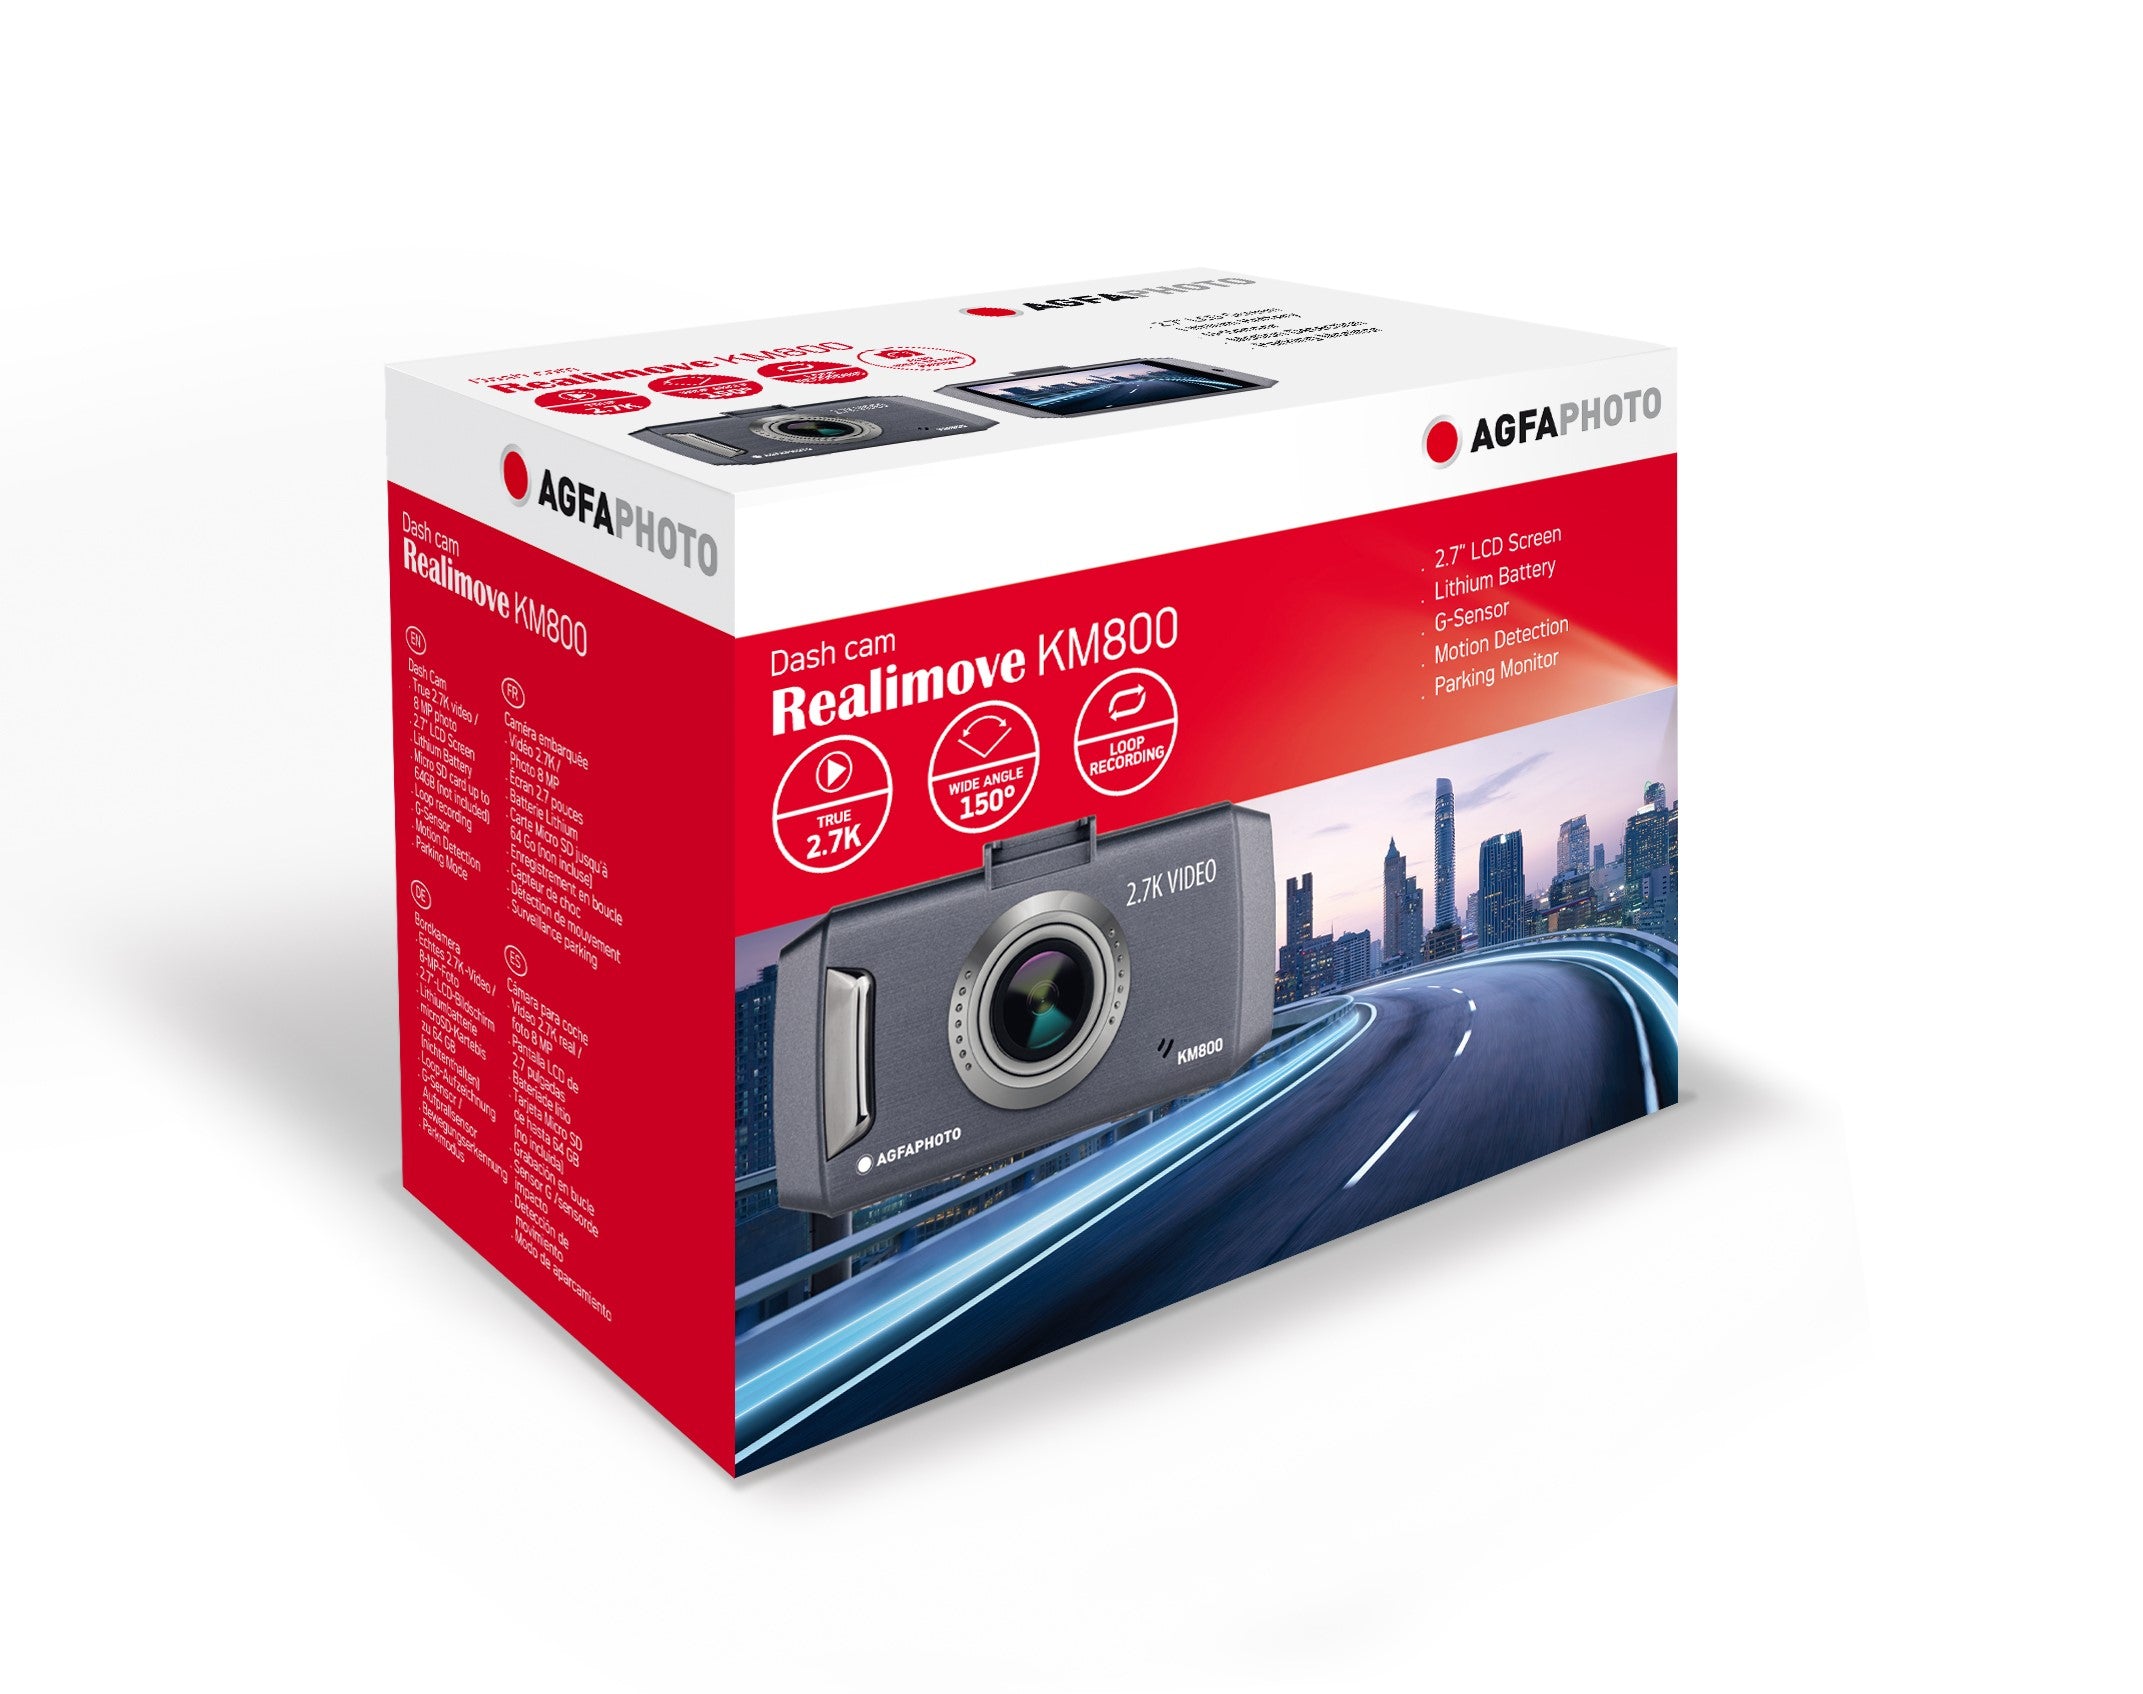 AgfaPhoto Realimove KM800 2.7K Ultra HD Dash Cam with LCD Screen, 150 Degree Wide Angle Lens, G-Sensor, Motion Detection and Parking Monitor